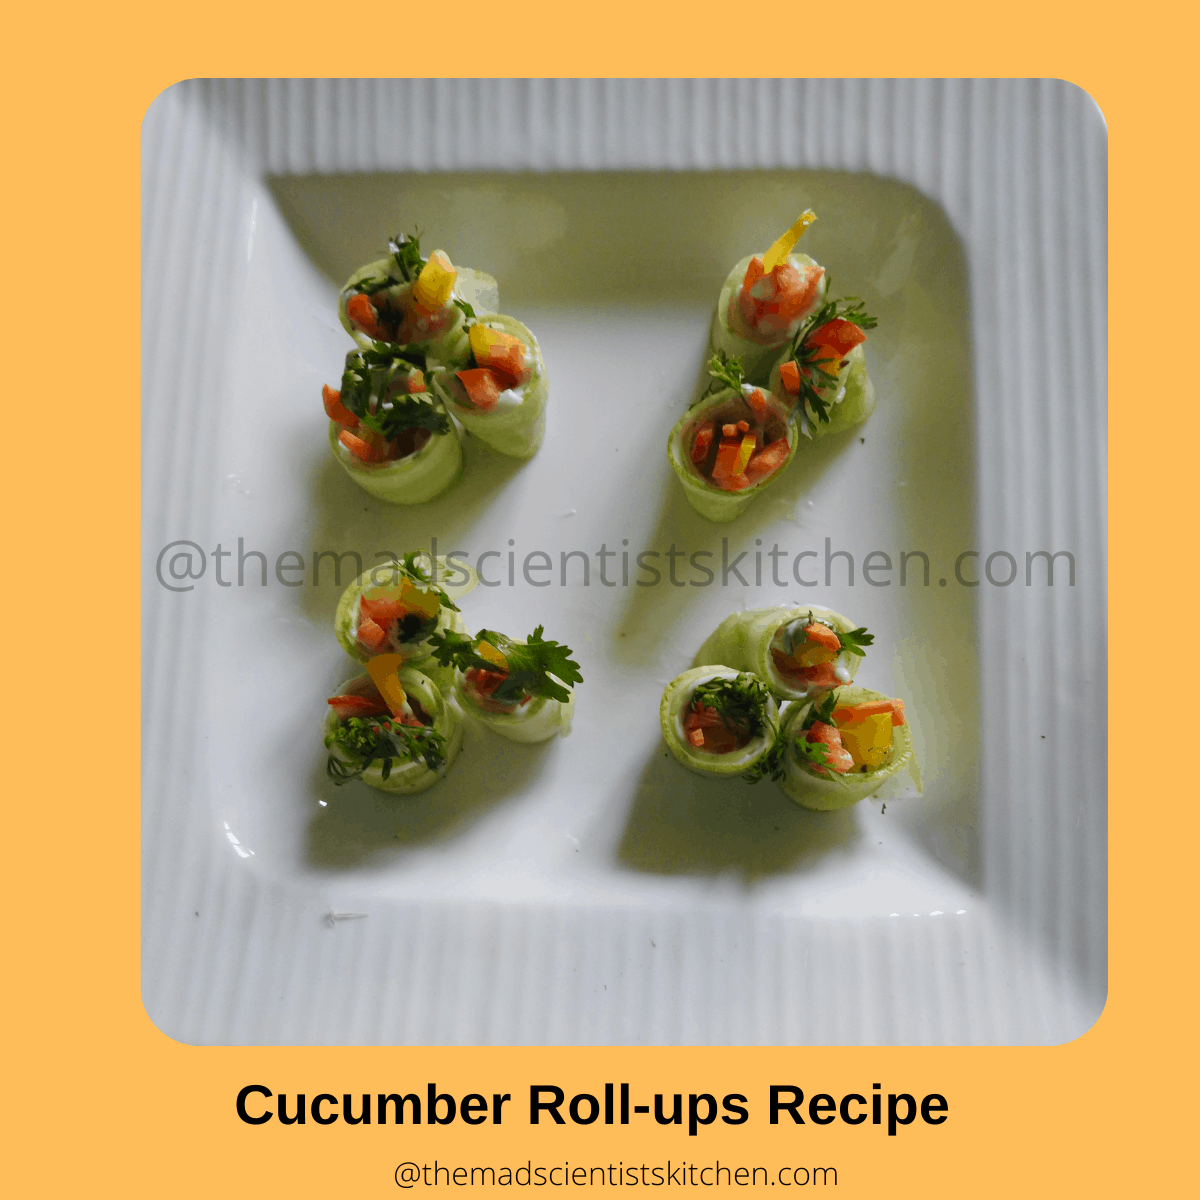 Dishing up some cheer with Cucumber Roll-ups Recipe